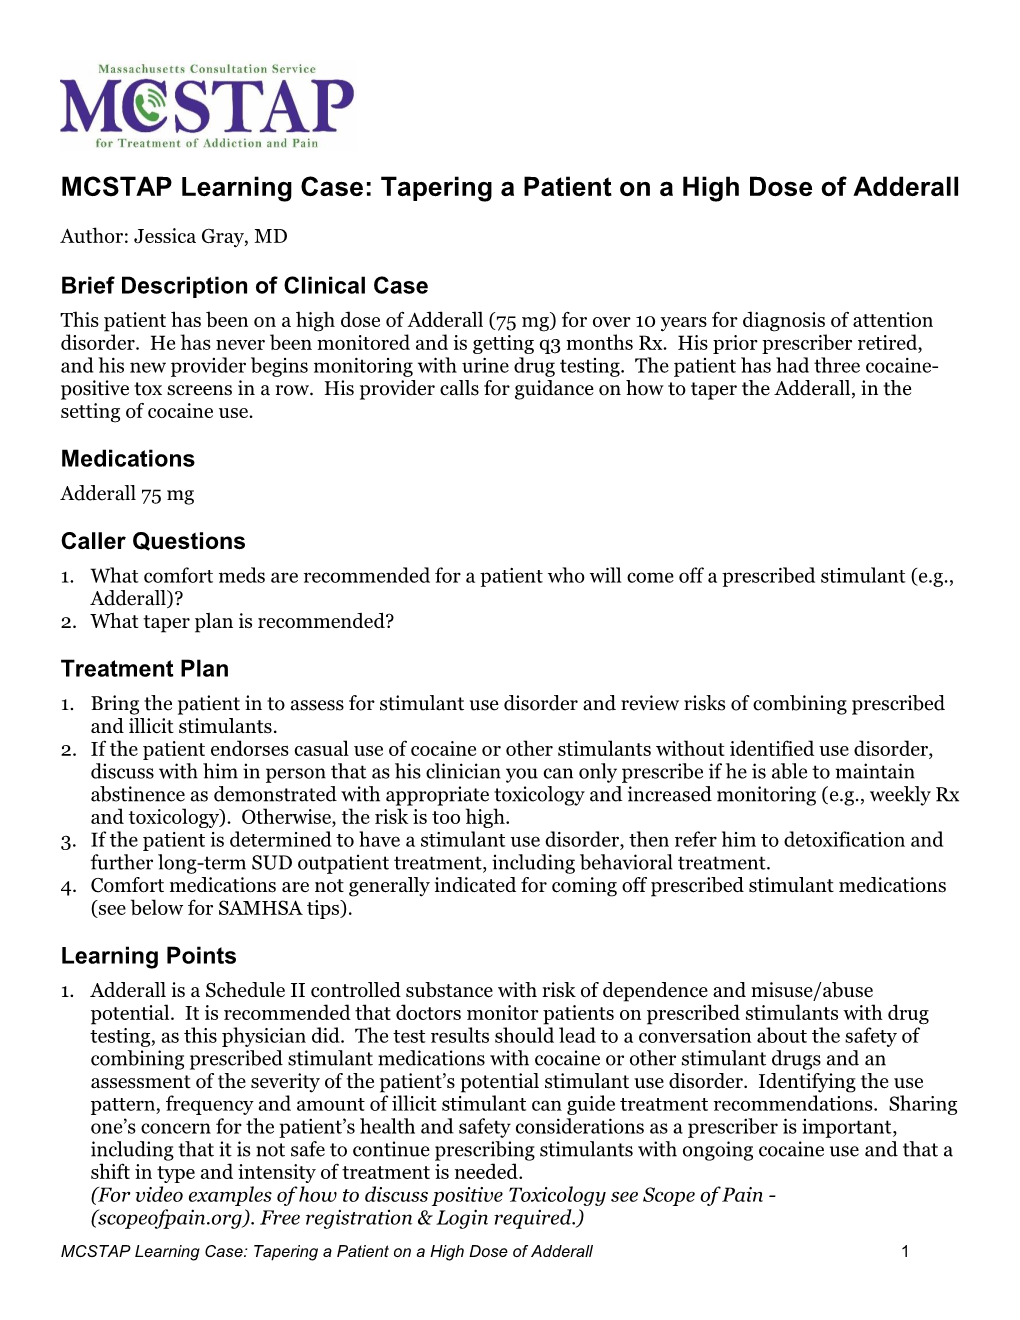 MCSTAP Learning Case: Tapering a Patient on a High Dose of Adderall